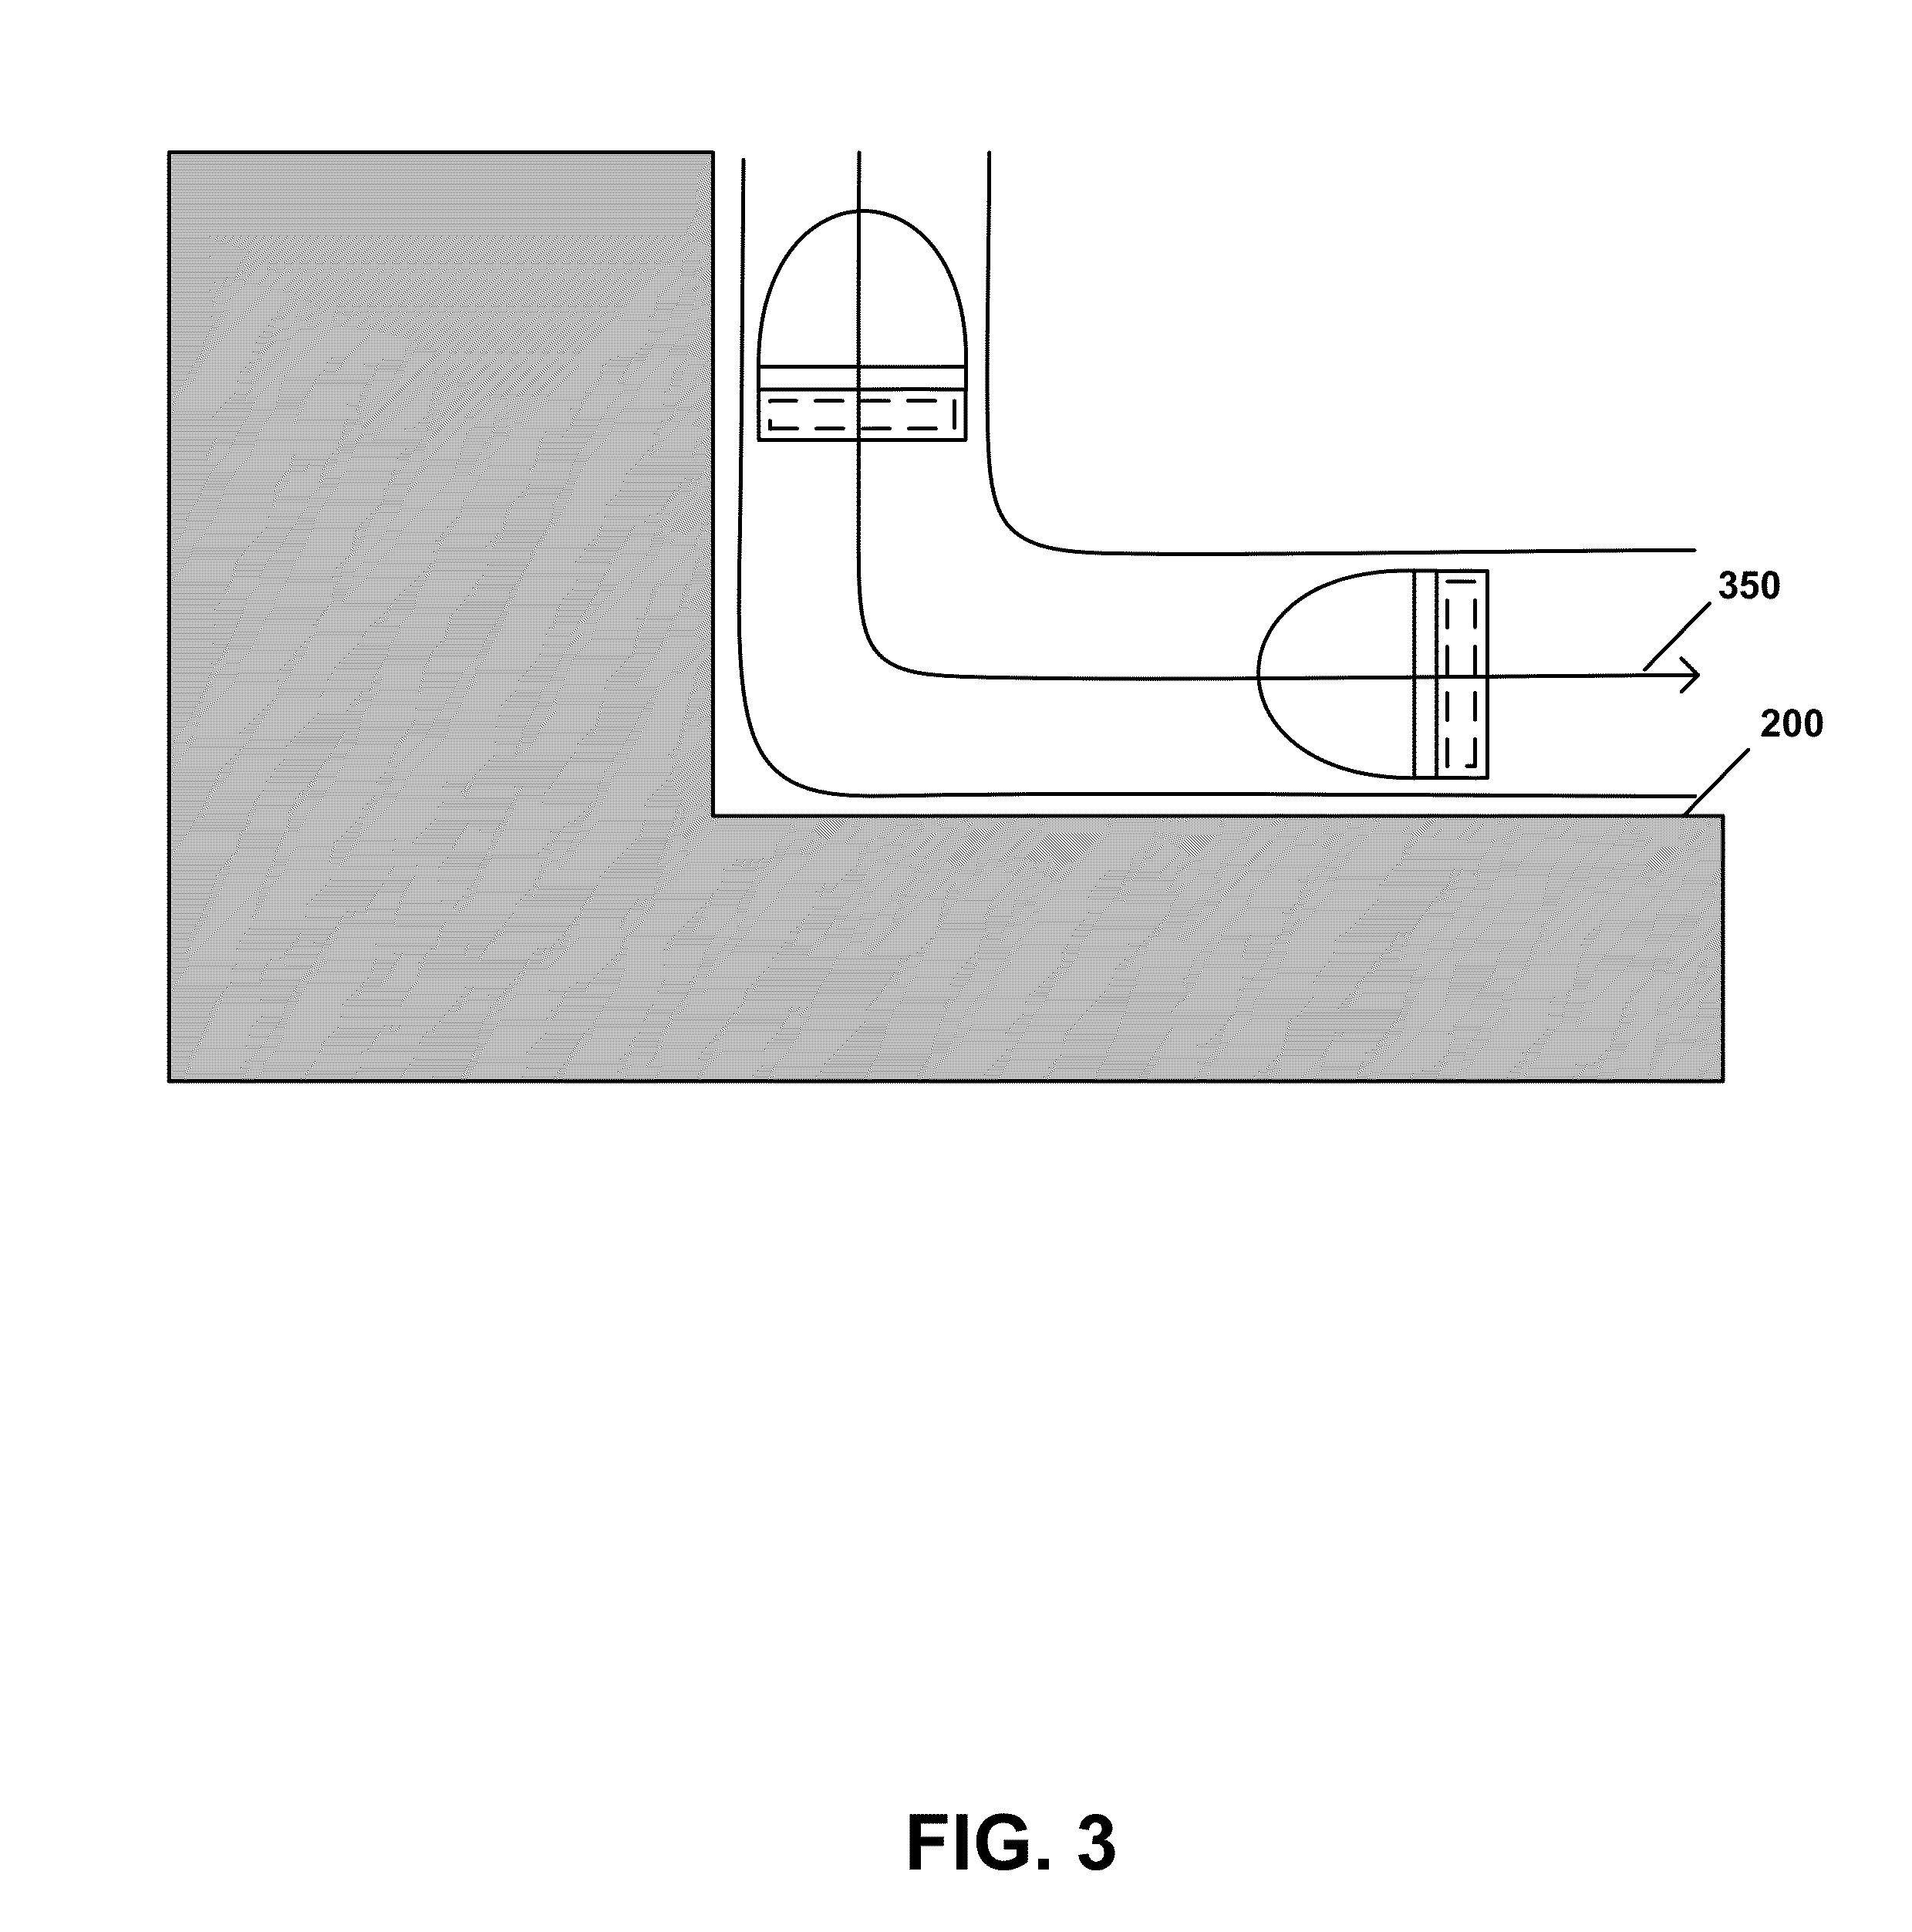 Method and apparatus for traversing corners of a floored area with a robotic surface treatment apparatus